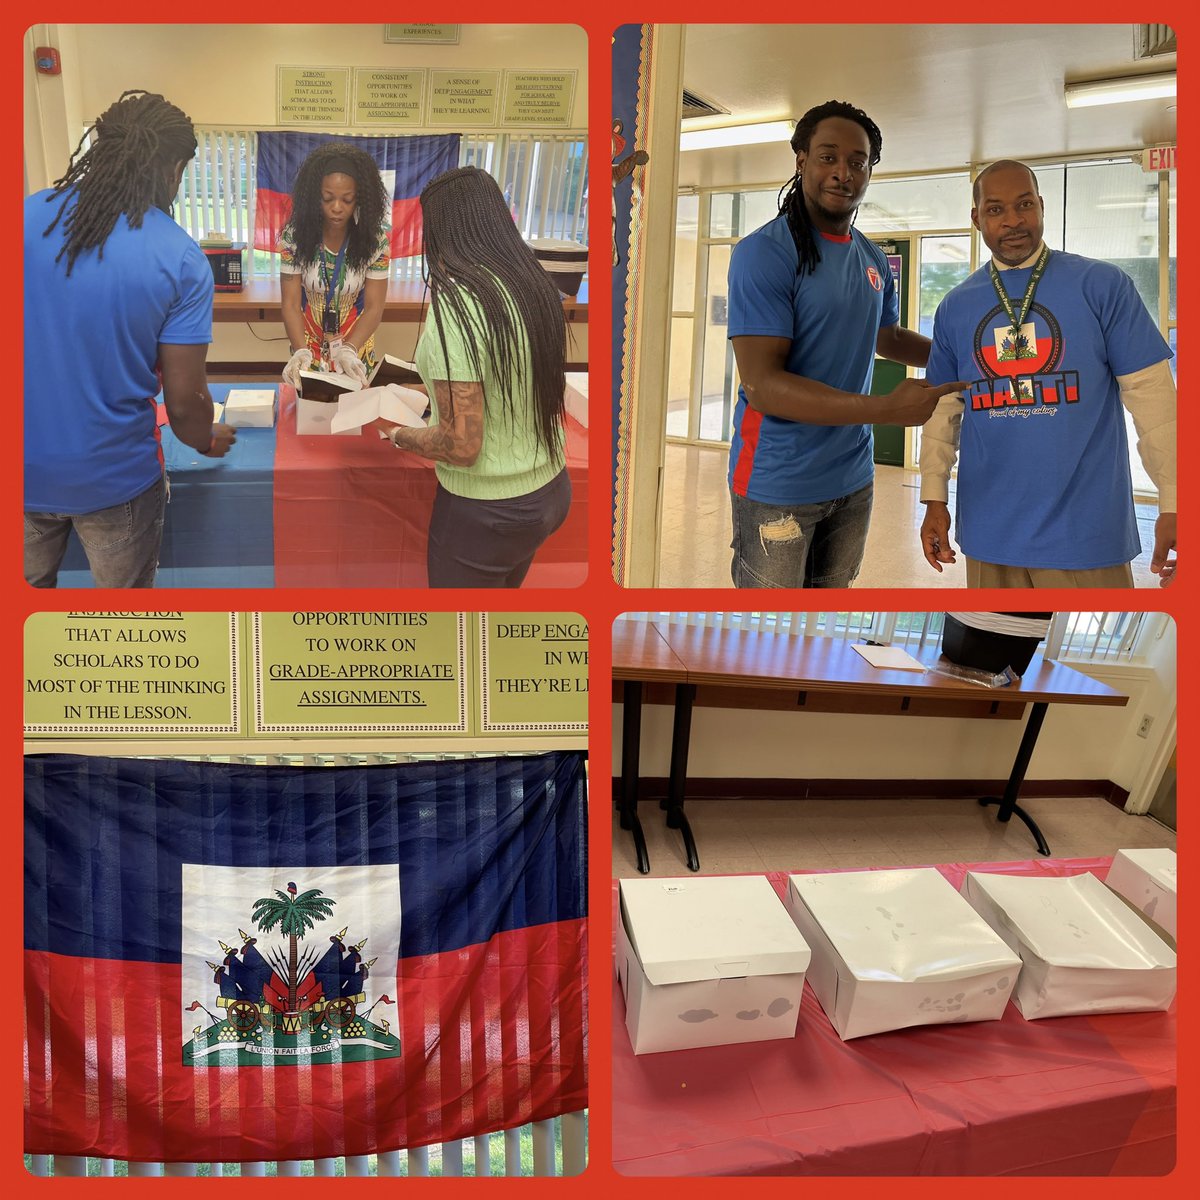 Celebrated #haitianflagday with our @RPEMuseummagnet daily today. Enjoyed some yummy treats courtesy of @Mrs_Kessler2020. @PrincipalDarby1 @BcpsCentral_ #HaitianHeritageMonth